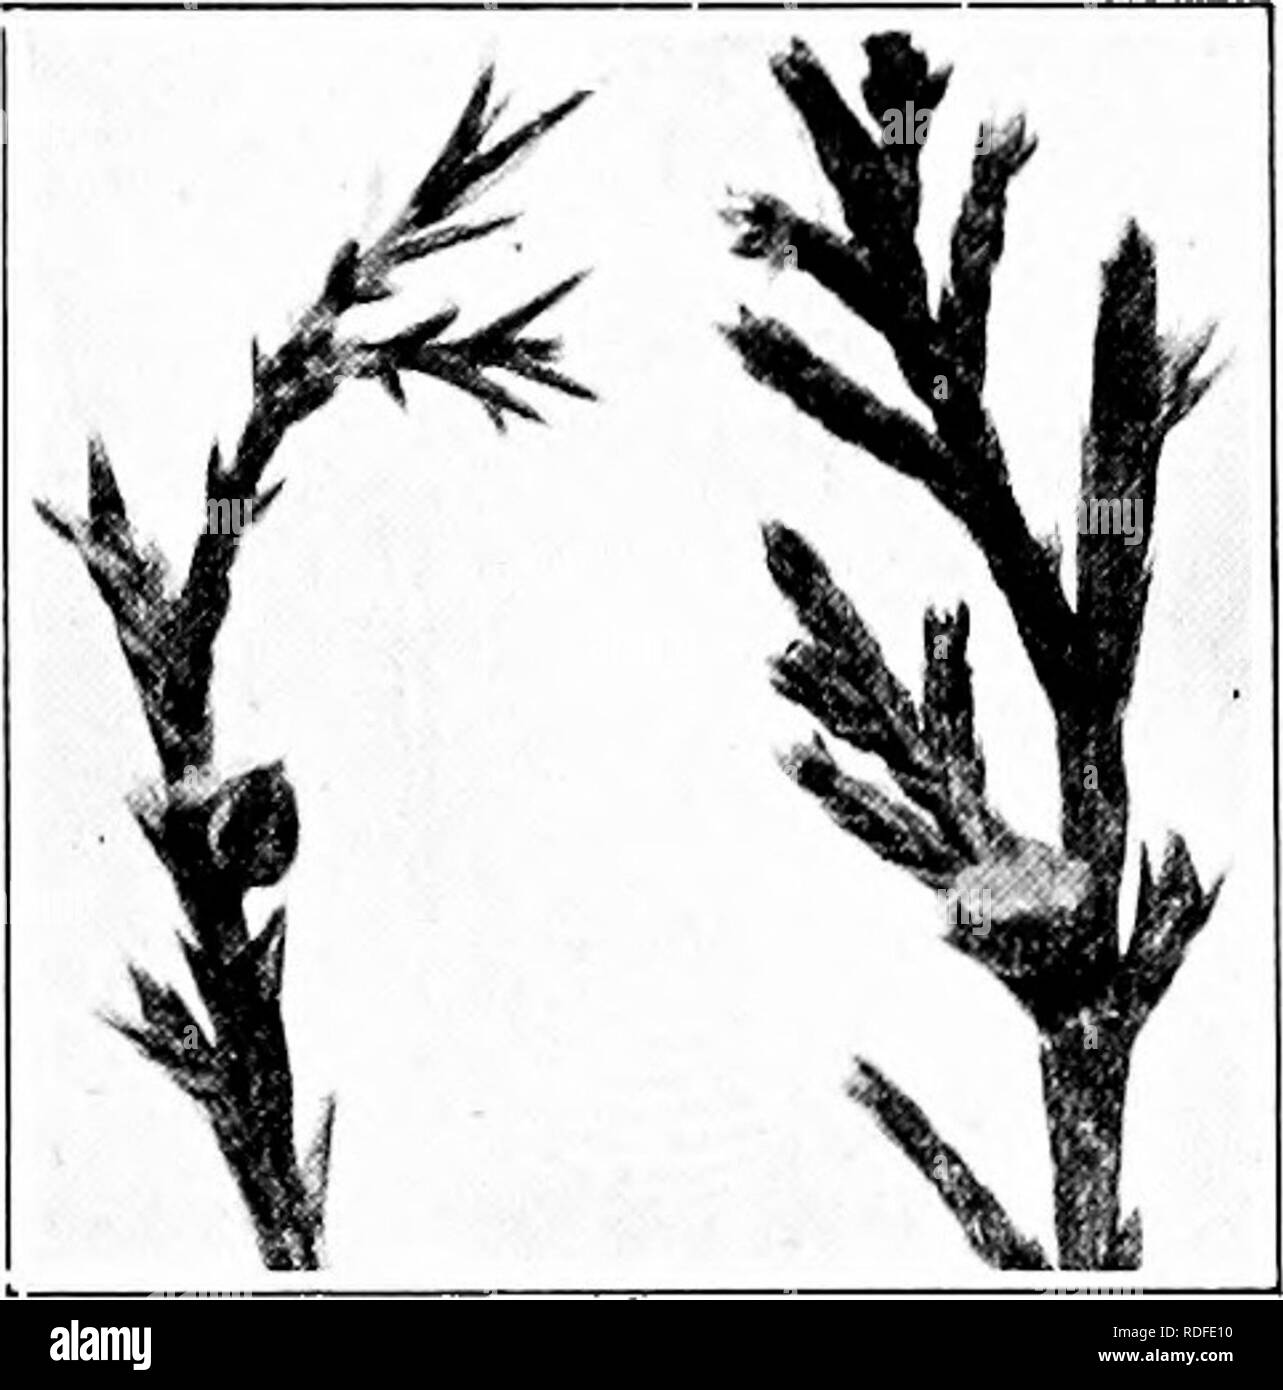 . Manual of tree diseases . Trees. JUNIPER DISEASES 197. Fig. 31. — Cedar-appUs, early- stages of development. Cedae-Apples Caused by Gymnosporangium juniperi-virginiance Schw. and G. glbbosum Farlow The two diseases of the red juniper known as cedar-apples or cedar-flowers are similar in nature and are found commonly in ea,stern and central United States. The first pathogene mentioned above has its alternate stage on the culti- vated apple and. other species of Malus, while the latter pathogene occurs on various species of haw, mountain ash and the cultivated apple, and pear. The junipers are Stock Photo